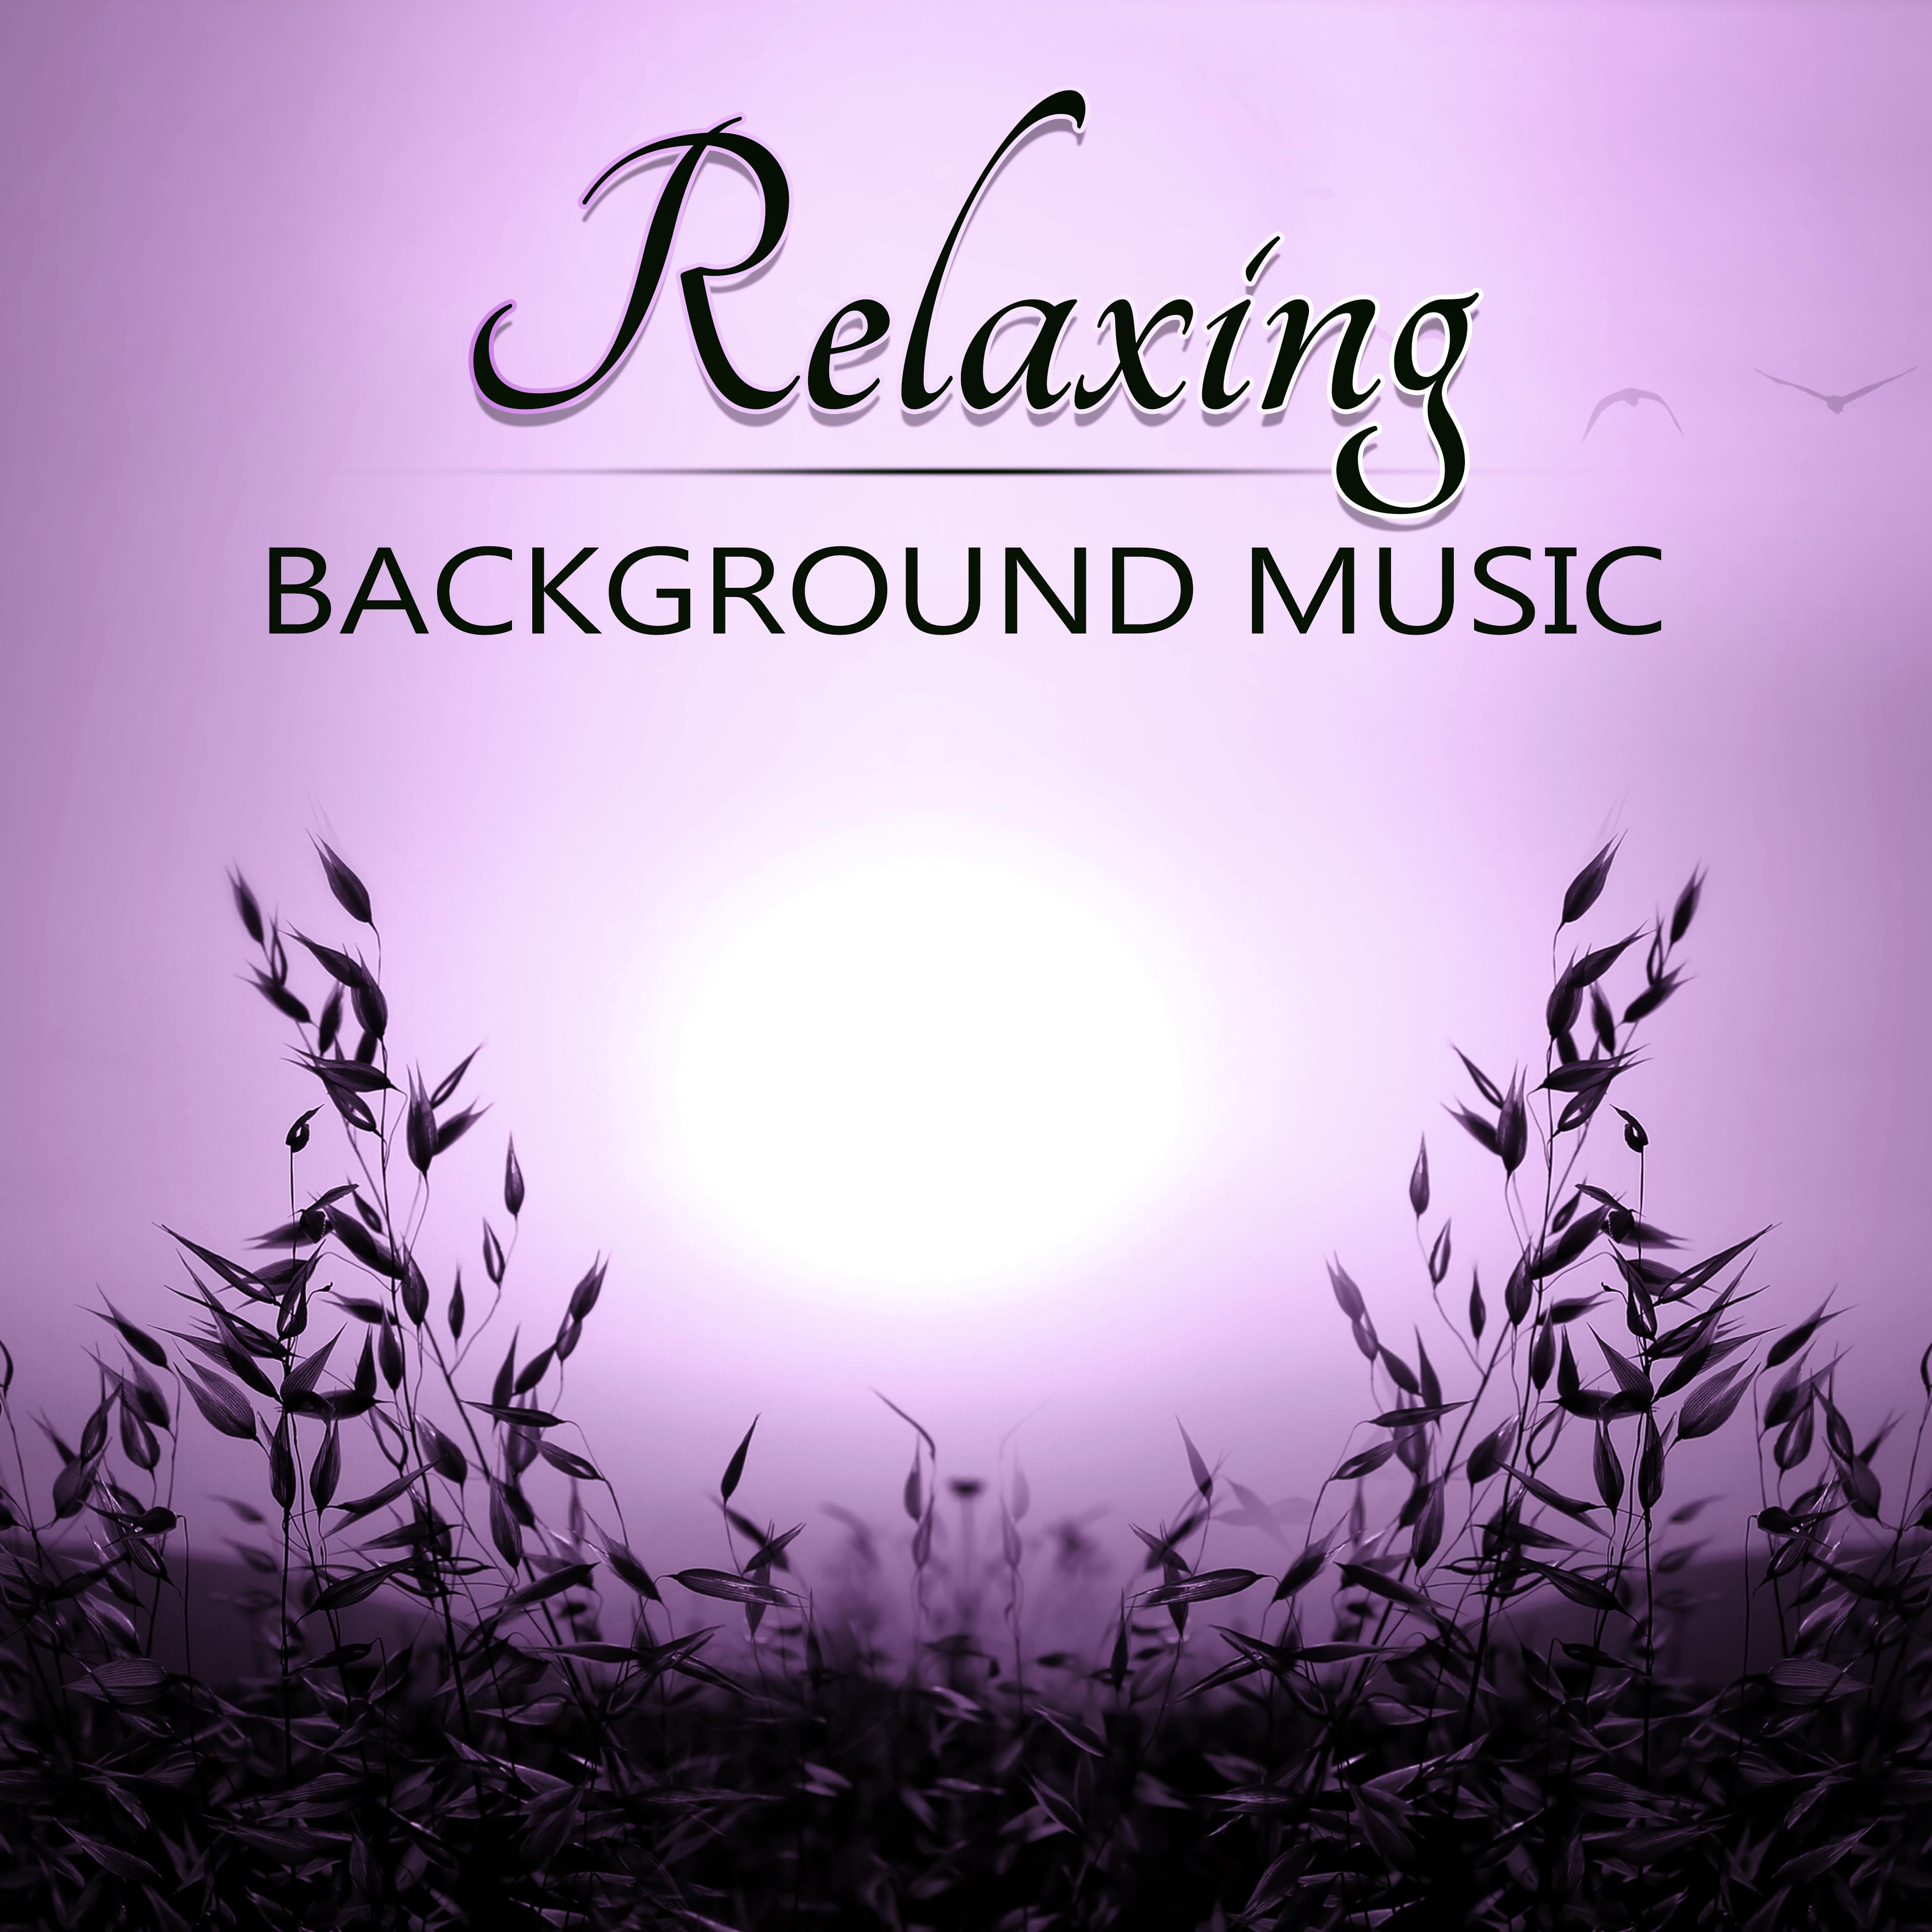 Relaxing Background Music - Smooth Jazz, Spending Time with Family, Enjoy Your Time Together, Free Time with Piano Bar, Serenity Music for Well Being